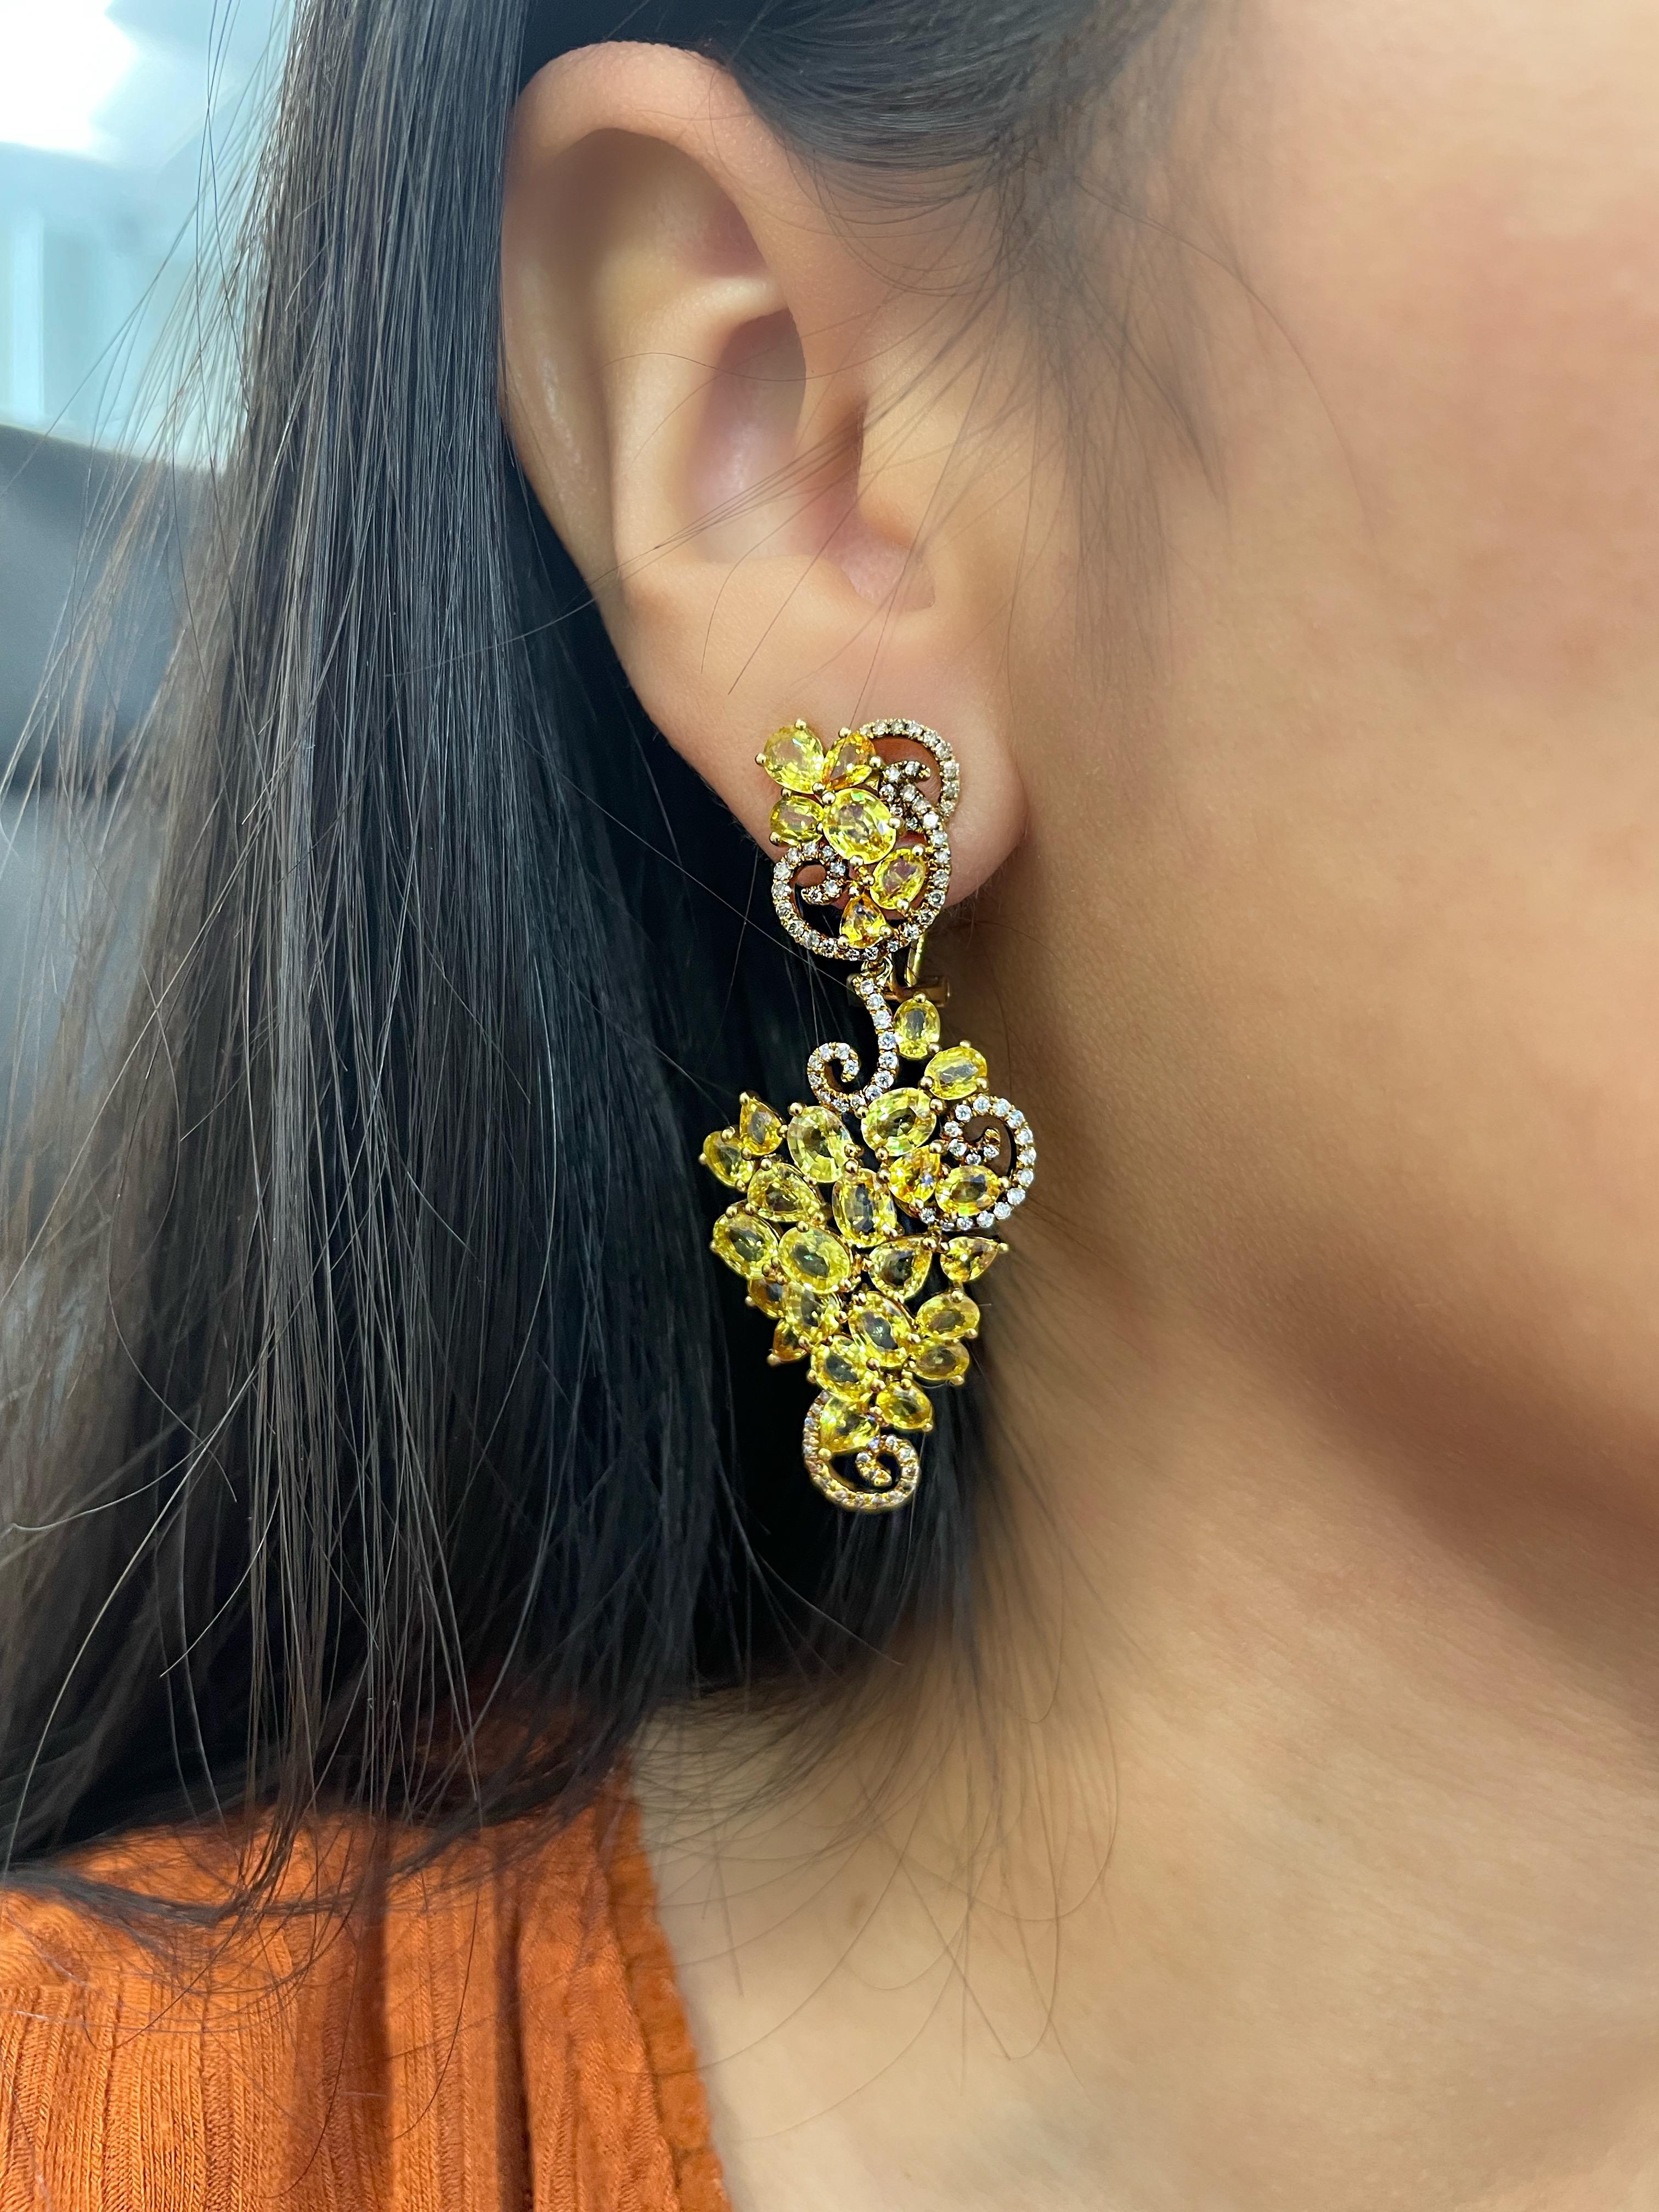  Discover the ultimate elegance and sophistication with these breathtaking 23.98 ctw natural yellow sapphire and diamond earrings. The vibrant yellow sapphires weigh a total of 22.80 carats. They are perfectly complemented by a halo of brilliant